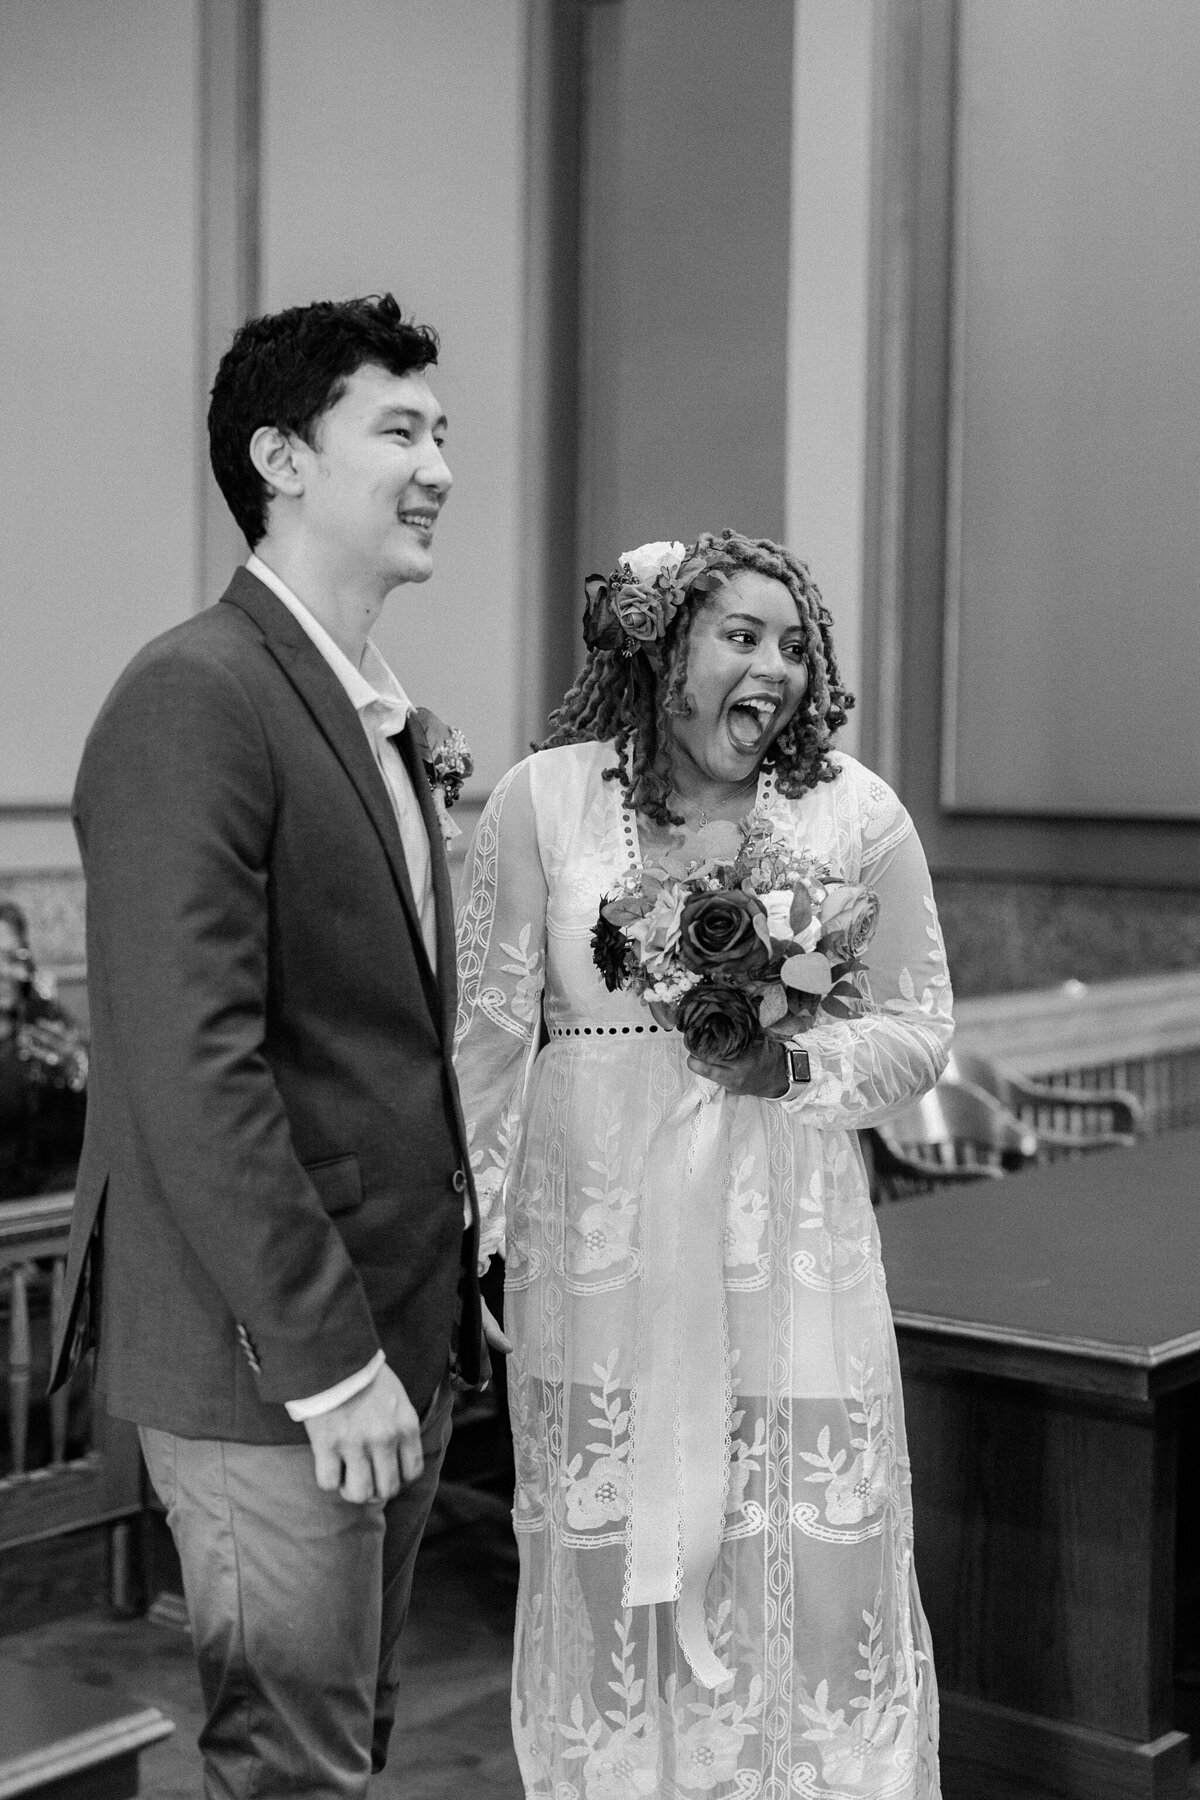 Black and white candid shot of a bride and groom during their wedding ceremony at the Tarrant County Courthouse in Fort Worth, Texas. The couple are both smiling and looking joyfully up at the judge who is out of frame. The groom is wearing a suit and boutonniere. The bride is wearing a long sleeve, intricate, white dress and is holding a bouquet.